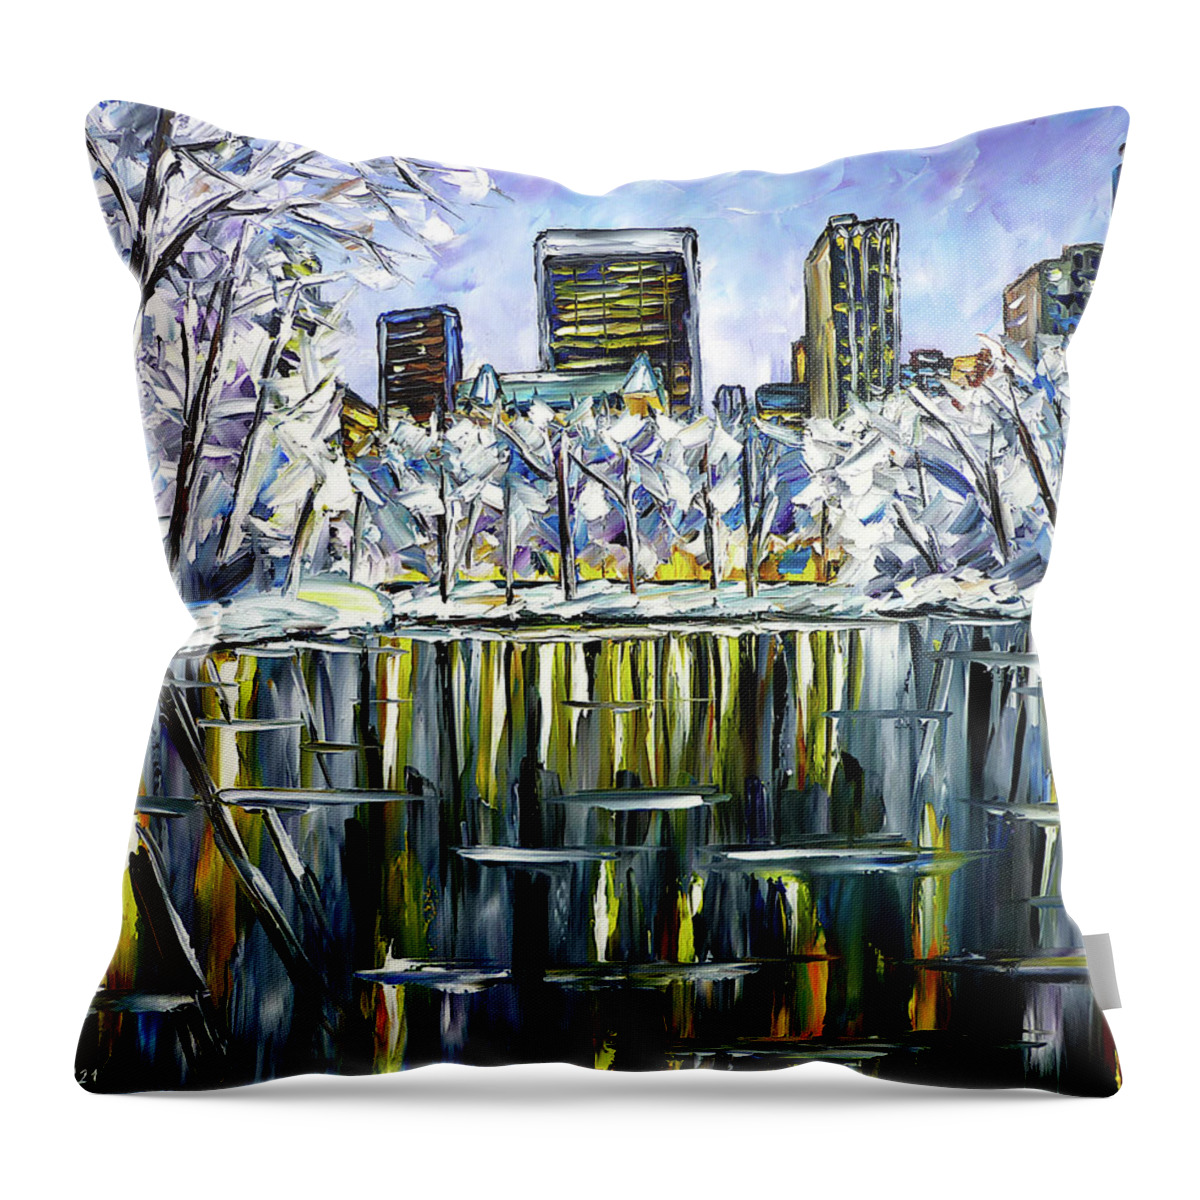 New York In Winter Throw Pillow featuring the painting Winter In Central Park by Mirek Kuzniar